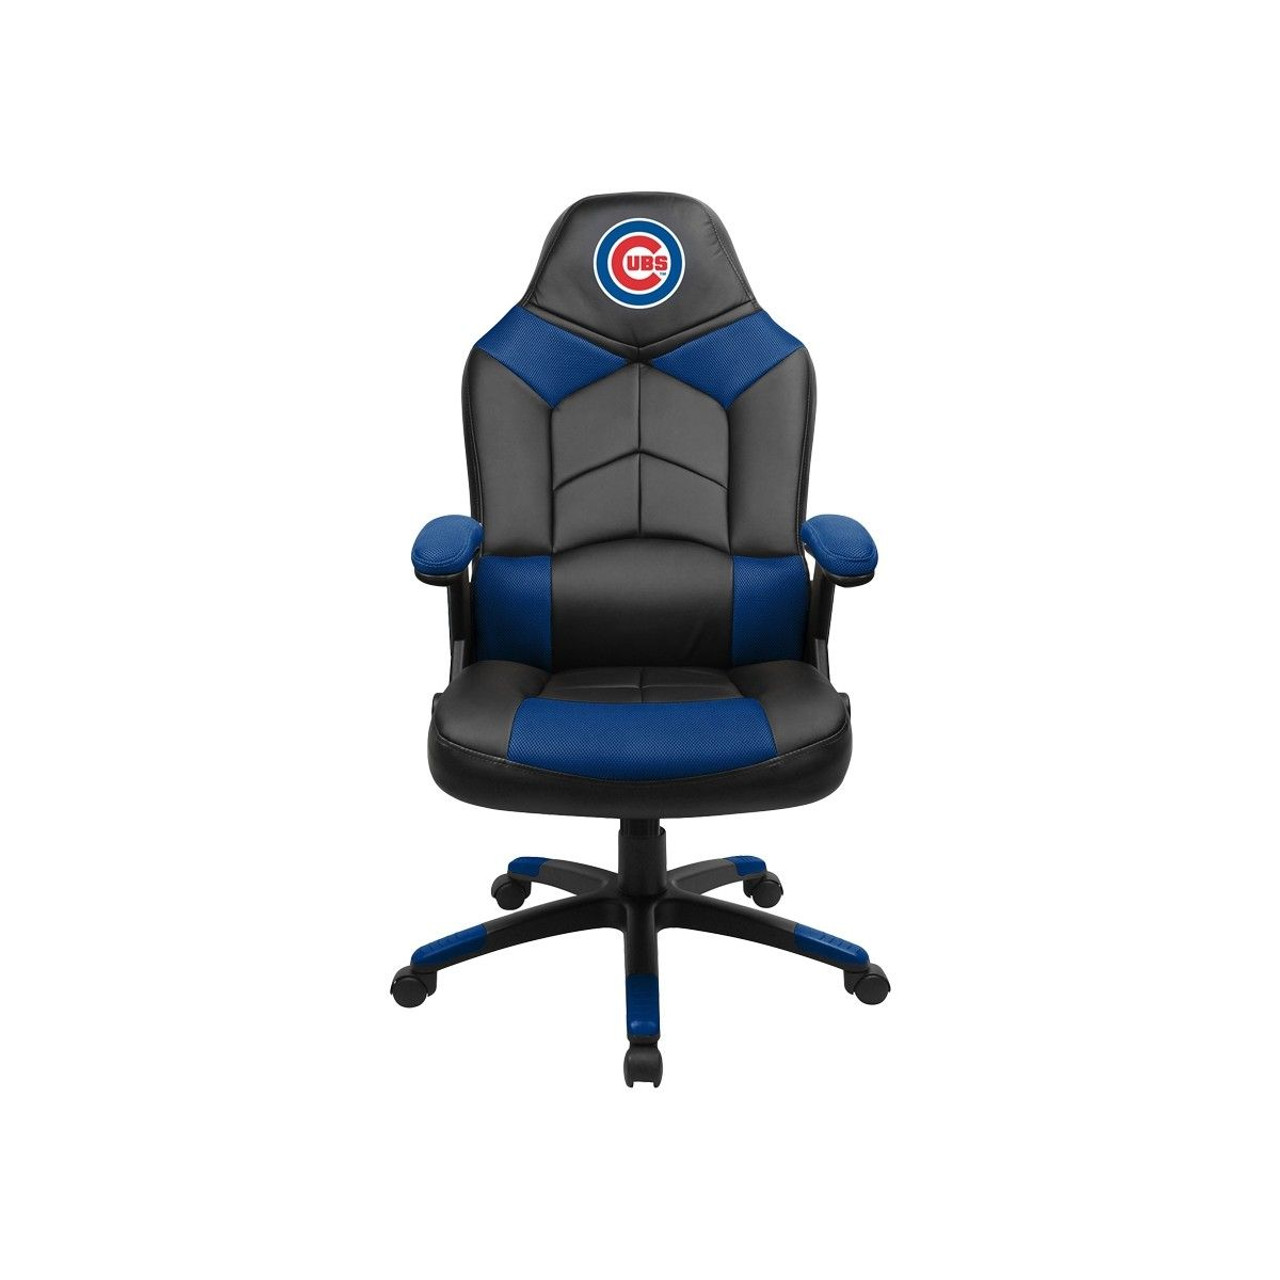 Chicago, Cubs, Oversized, Gaming, Chair, Imperial, Baseball, MLB, 720801342054
